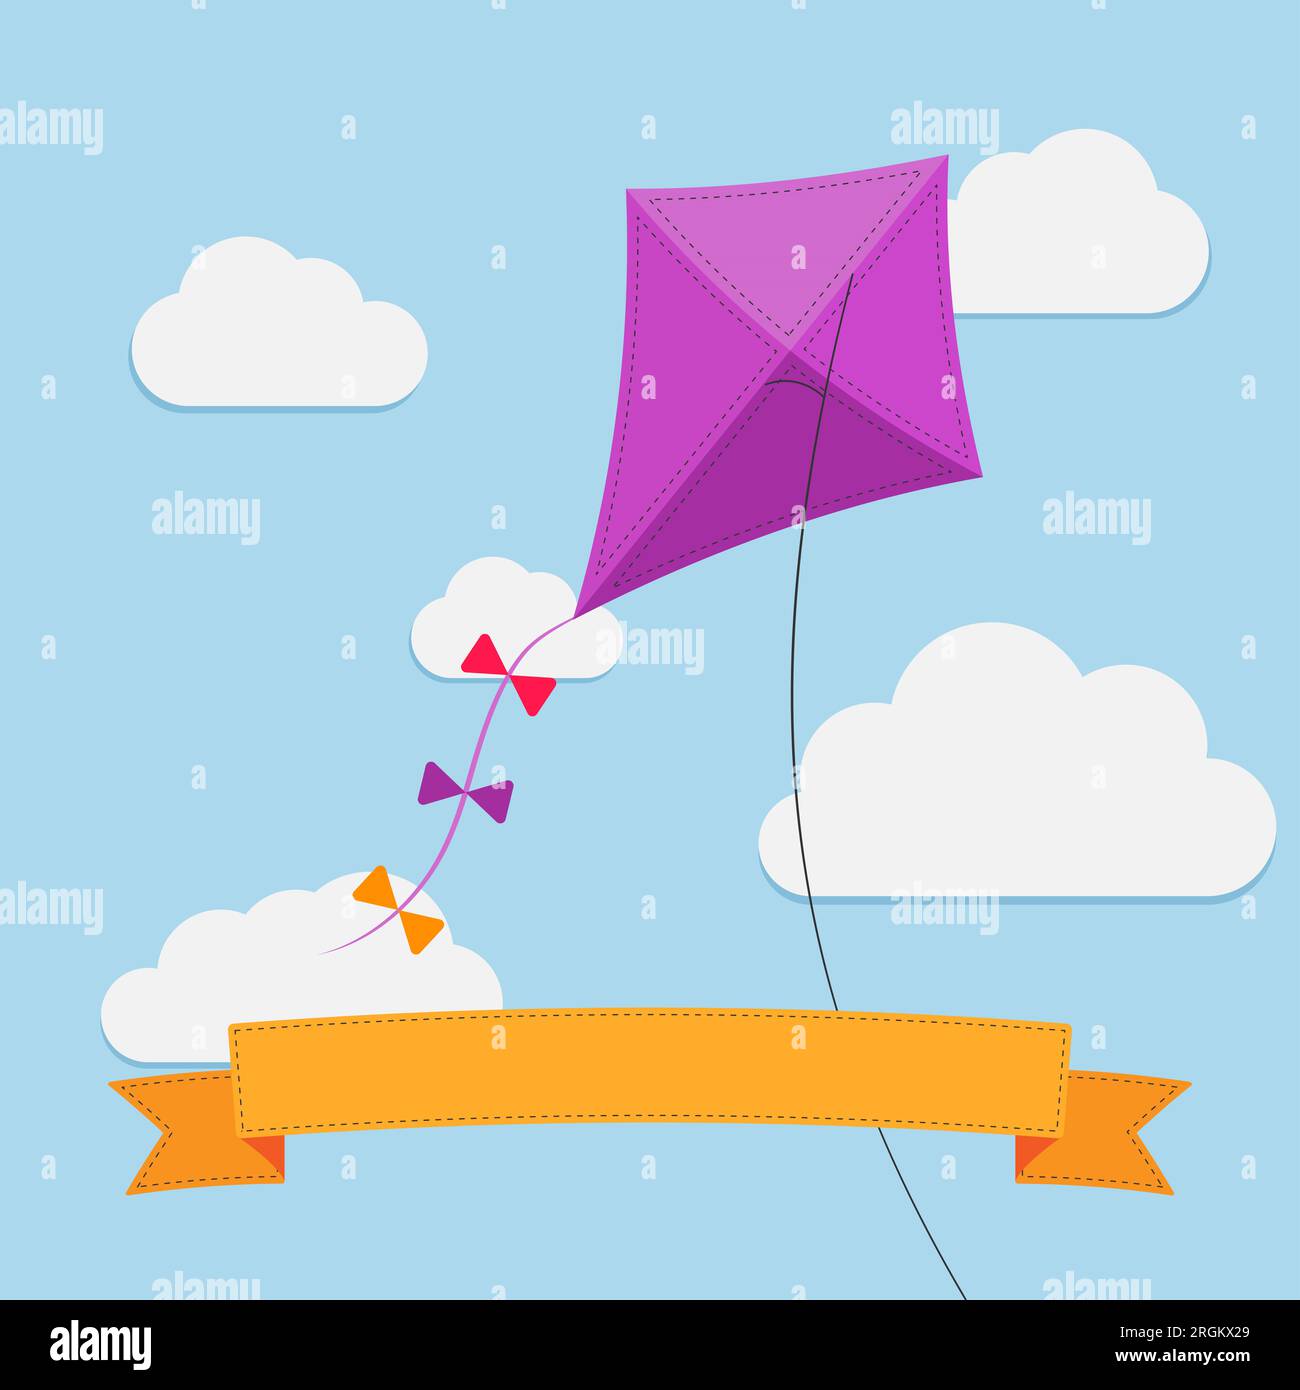 Flying kite in the sky between clouds with space for text . Purple paper kite with white clouds in blue sky. Wind concept. Childhood symbol. Stock Photo